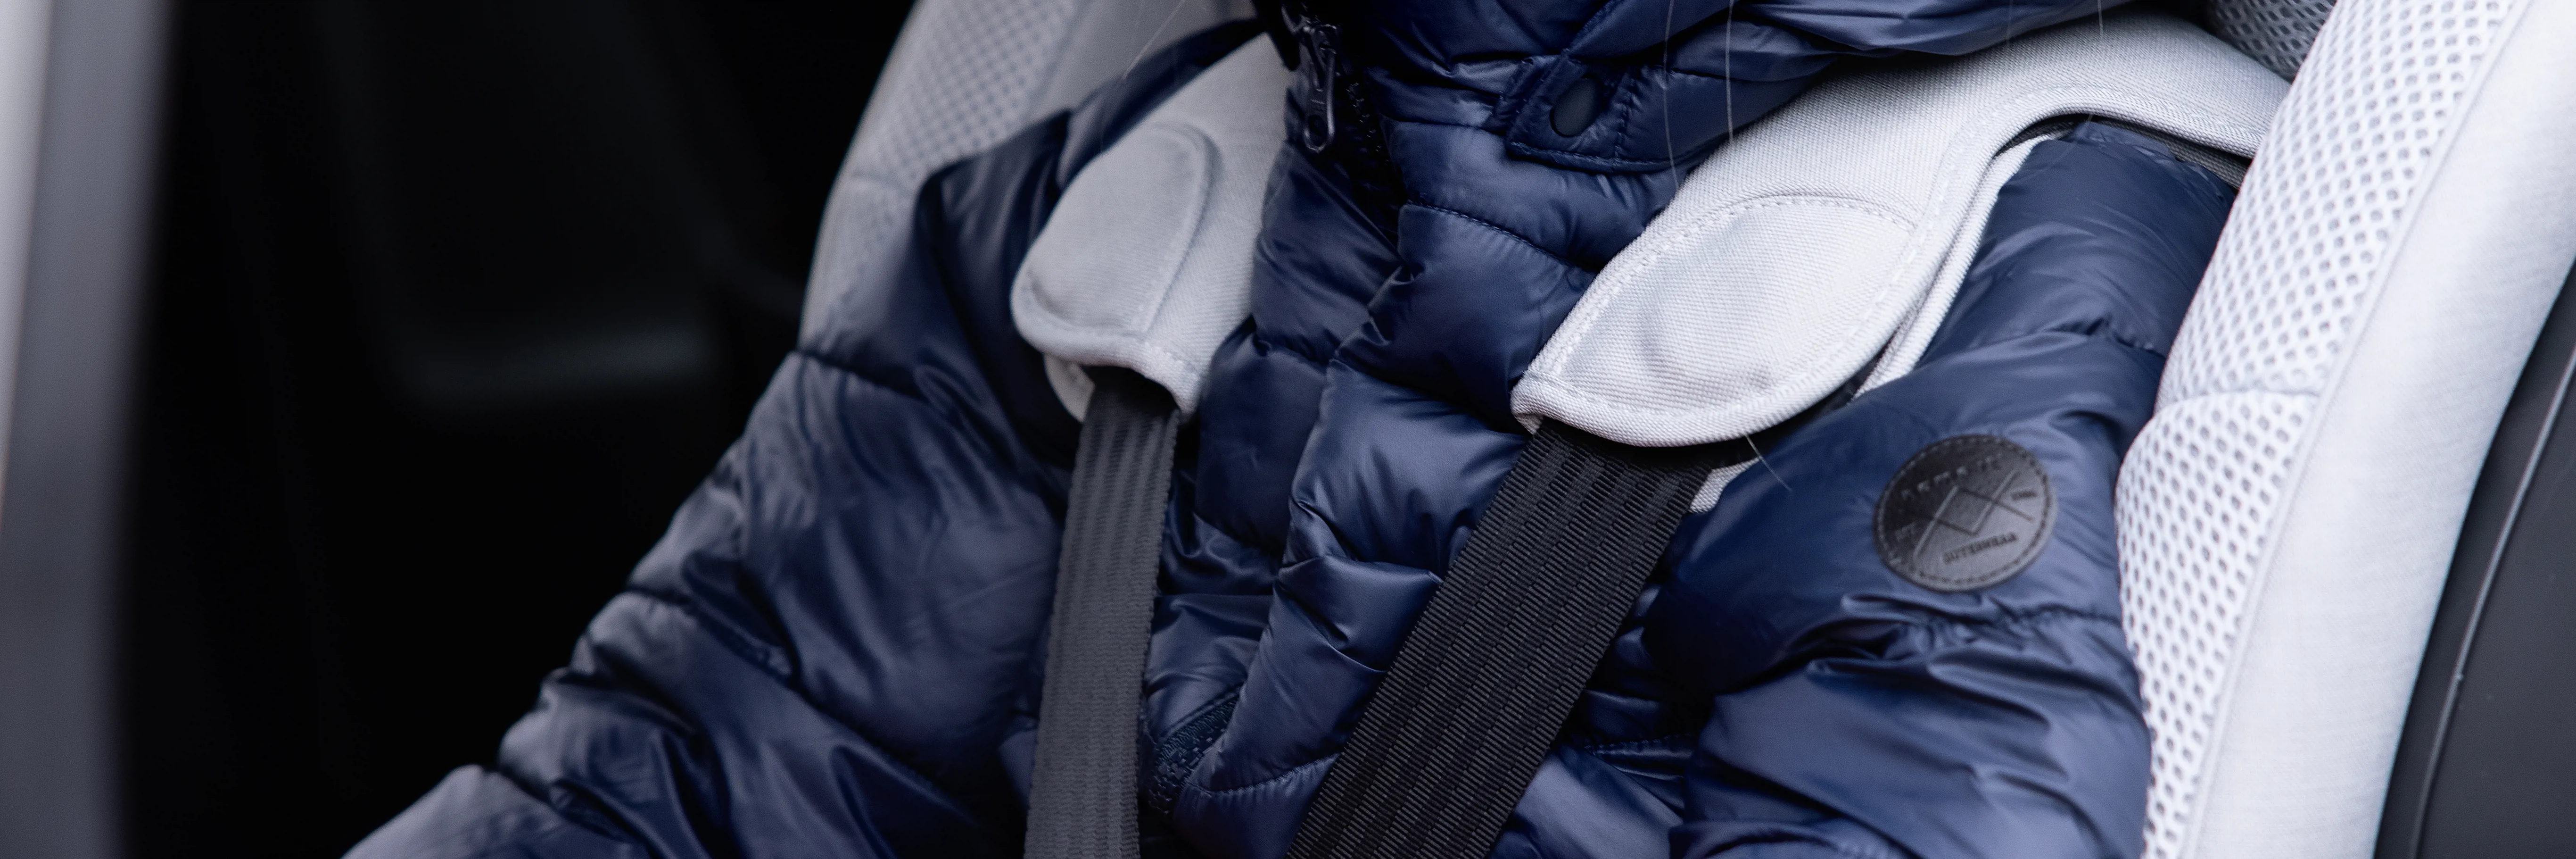 Which parts of a child car seat can be added or removed?